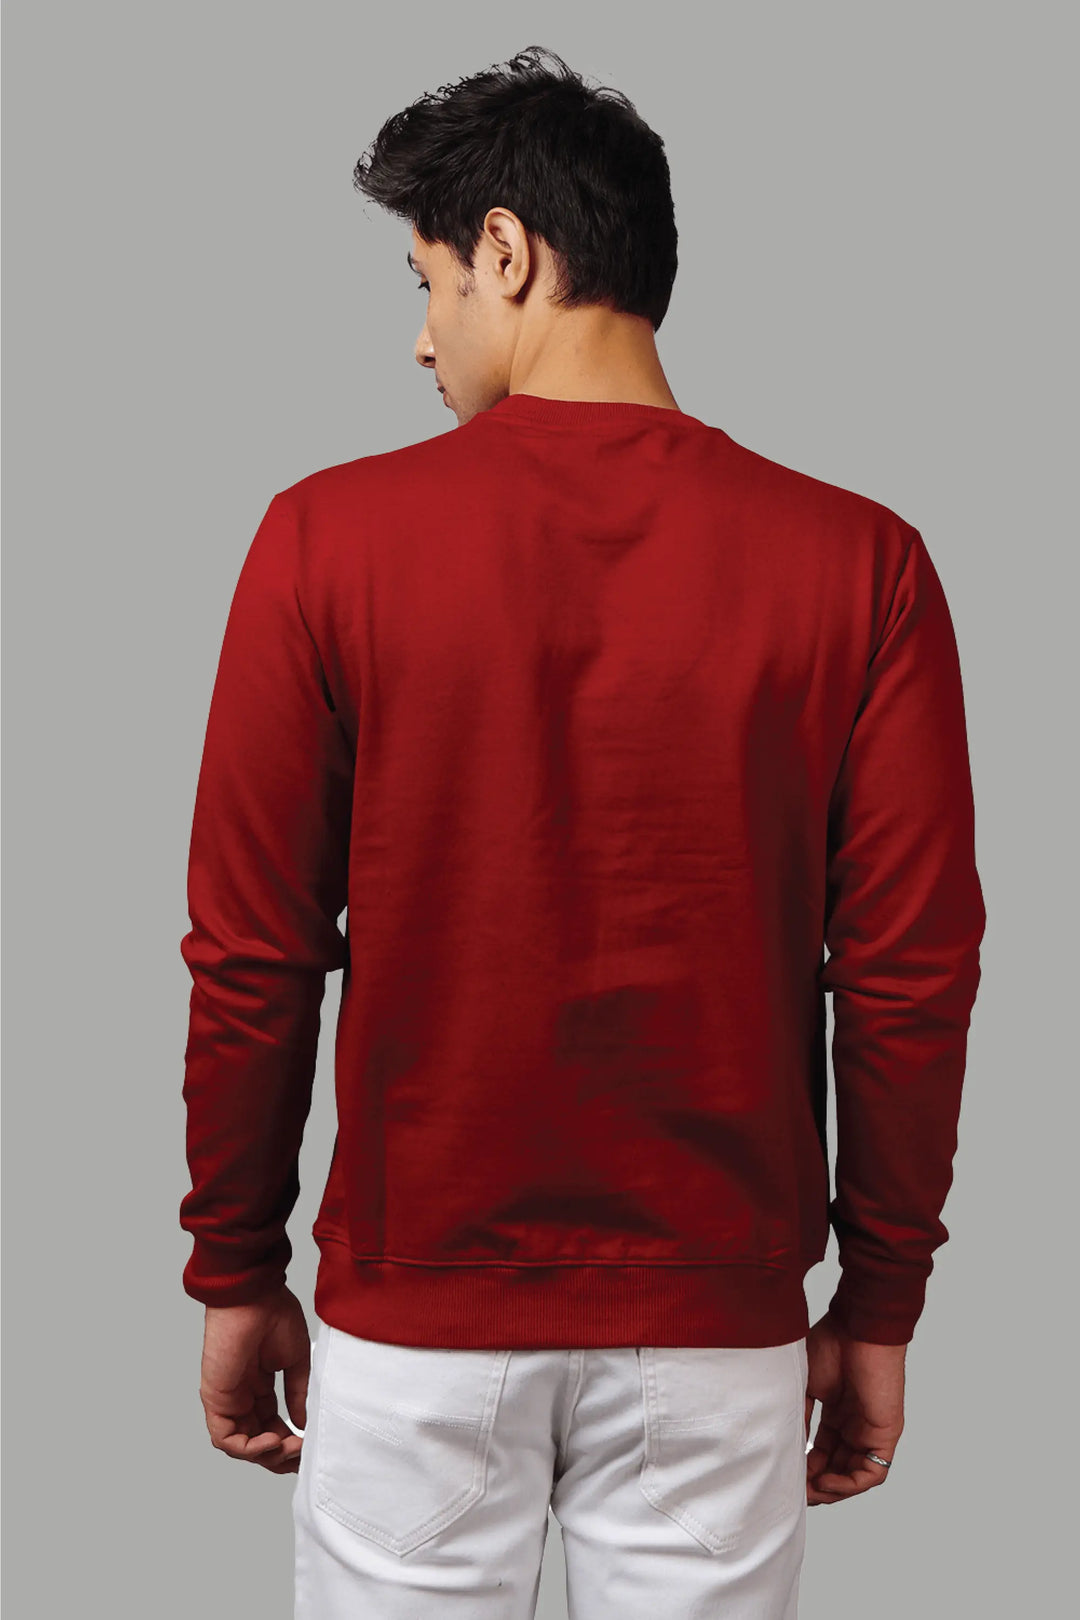 The sweatshirt is made with premium fabric to give you a perfect look with comfort color is elegant and beautiful styles come under a affordable range